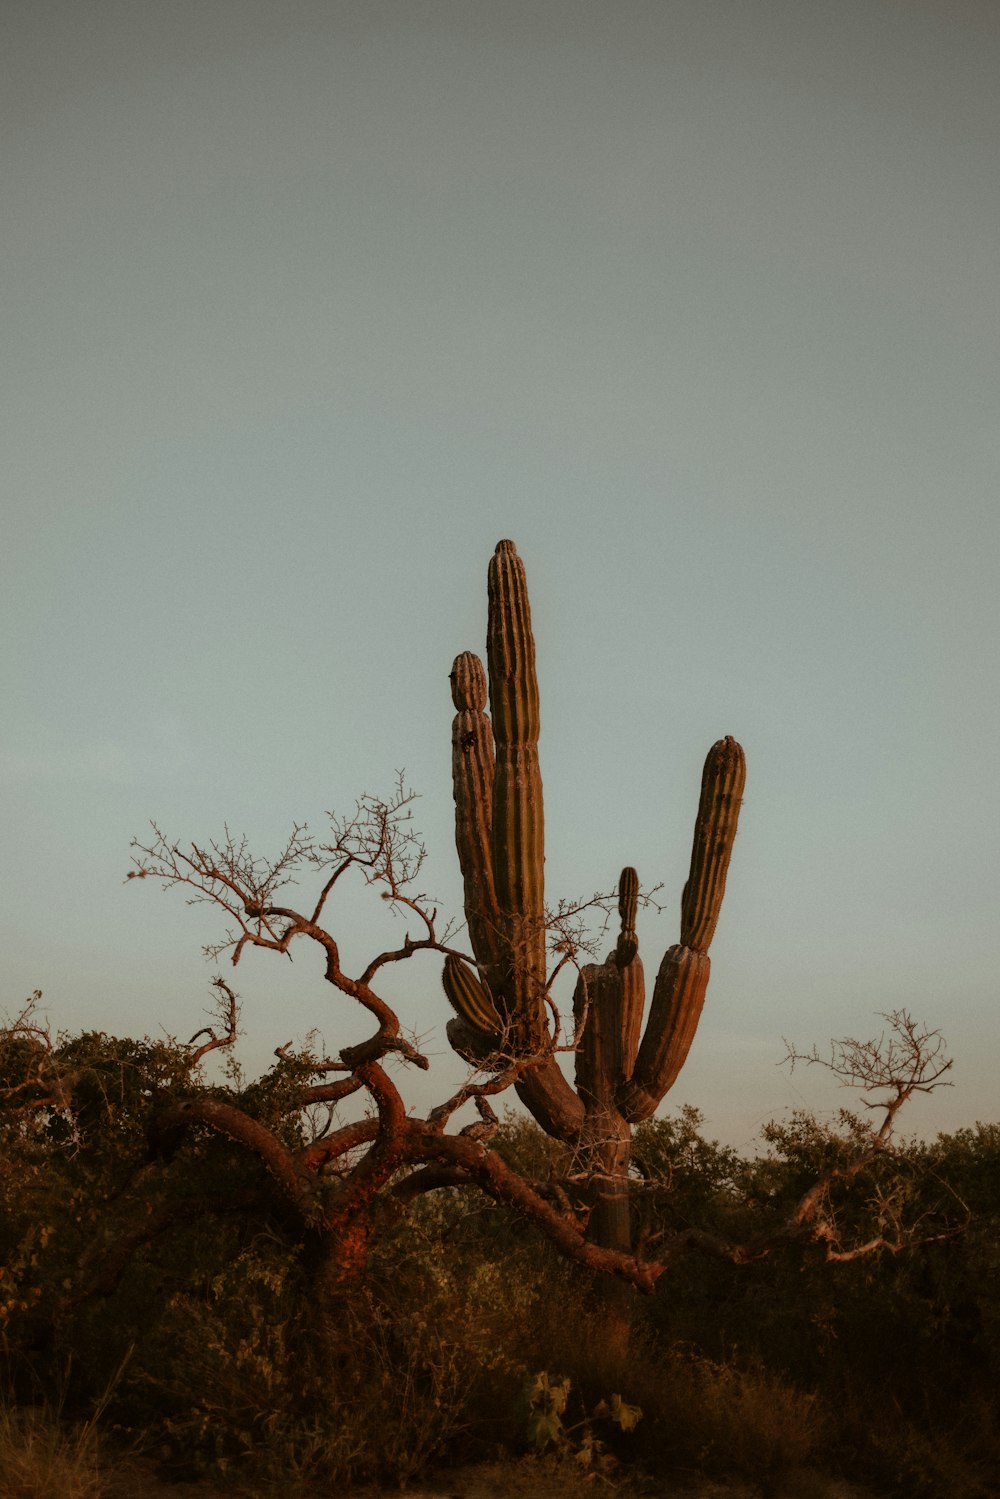 a cactus with a person on it